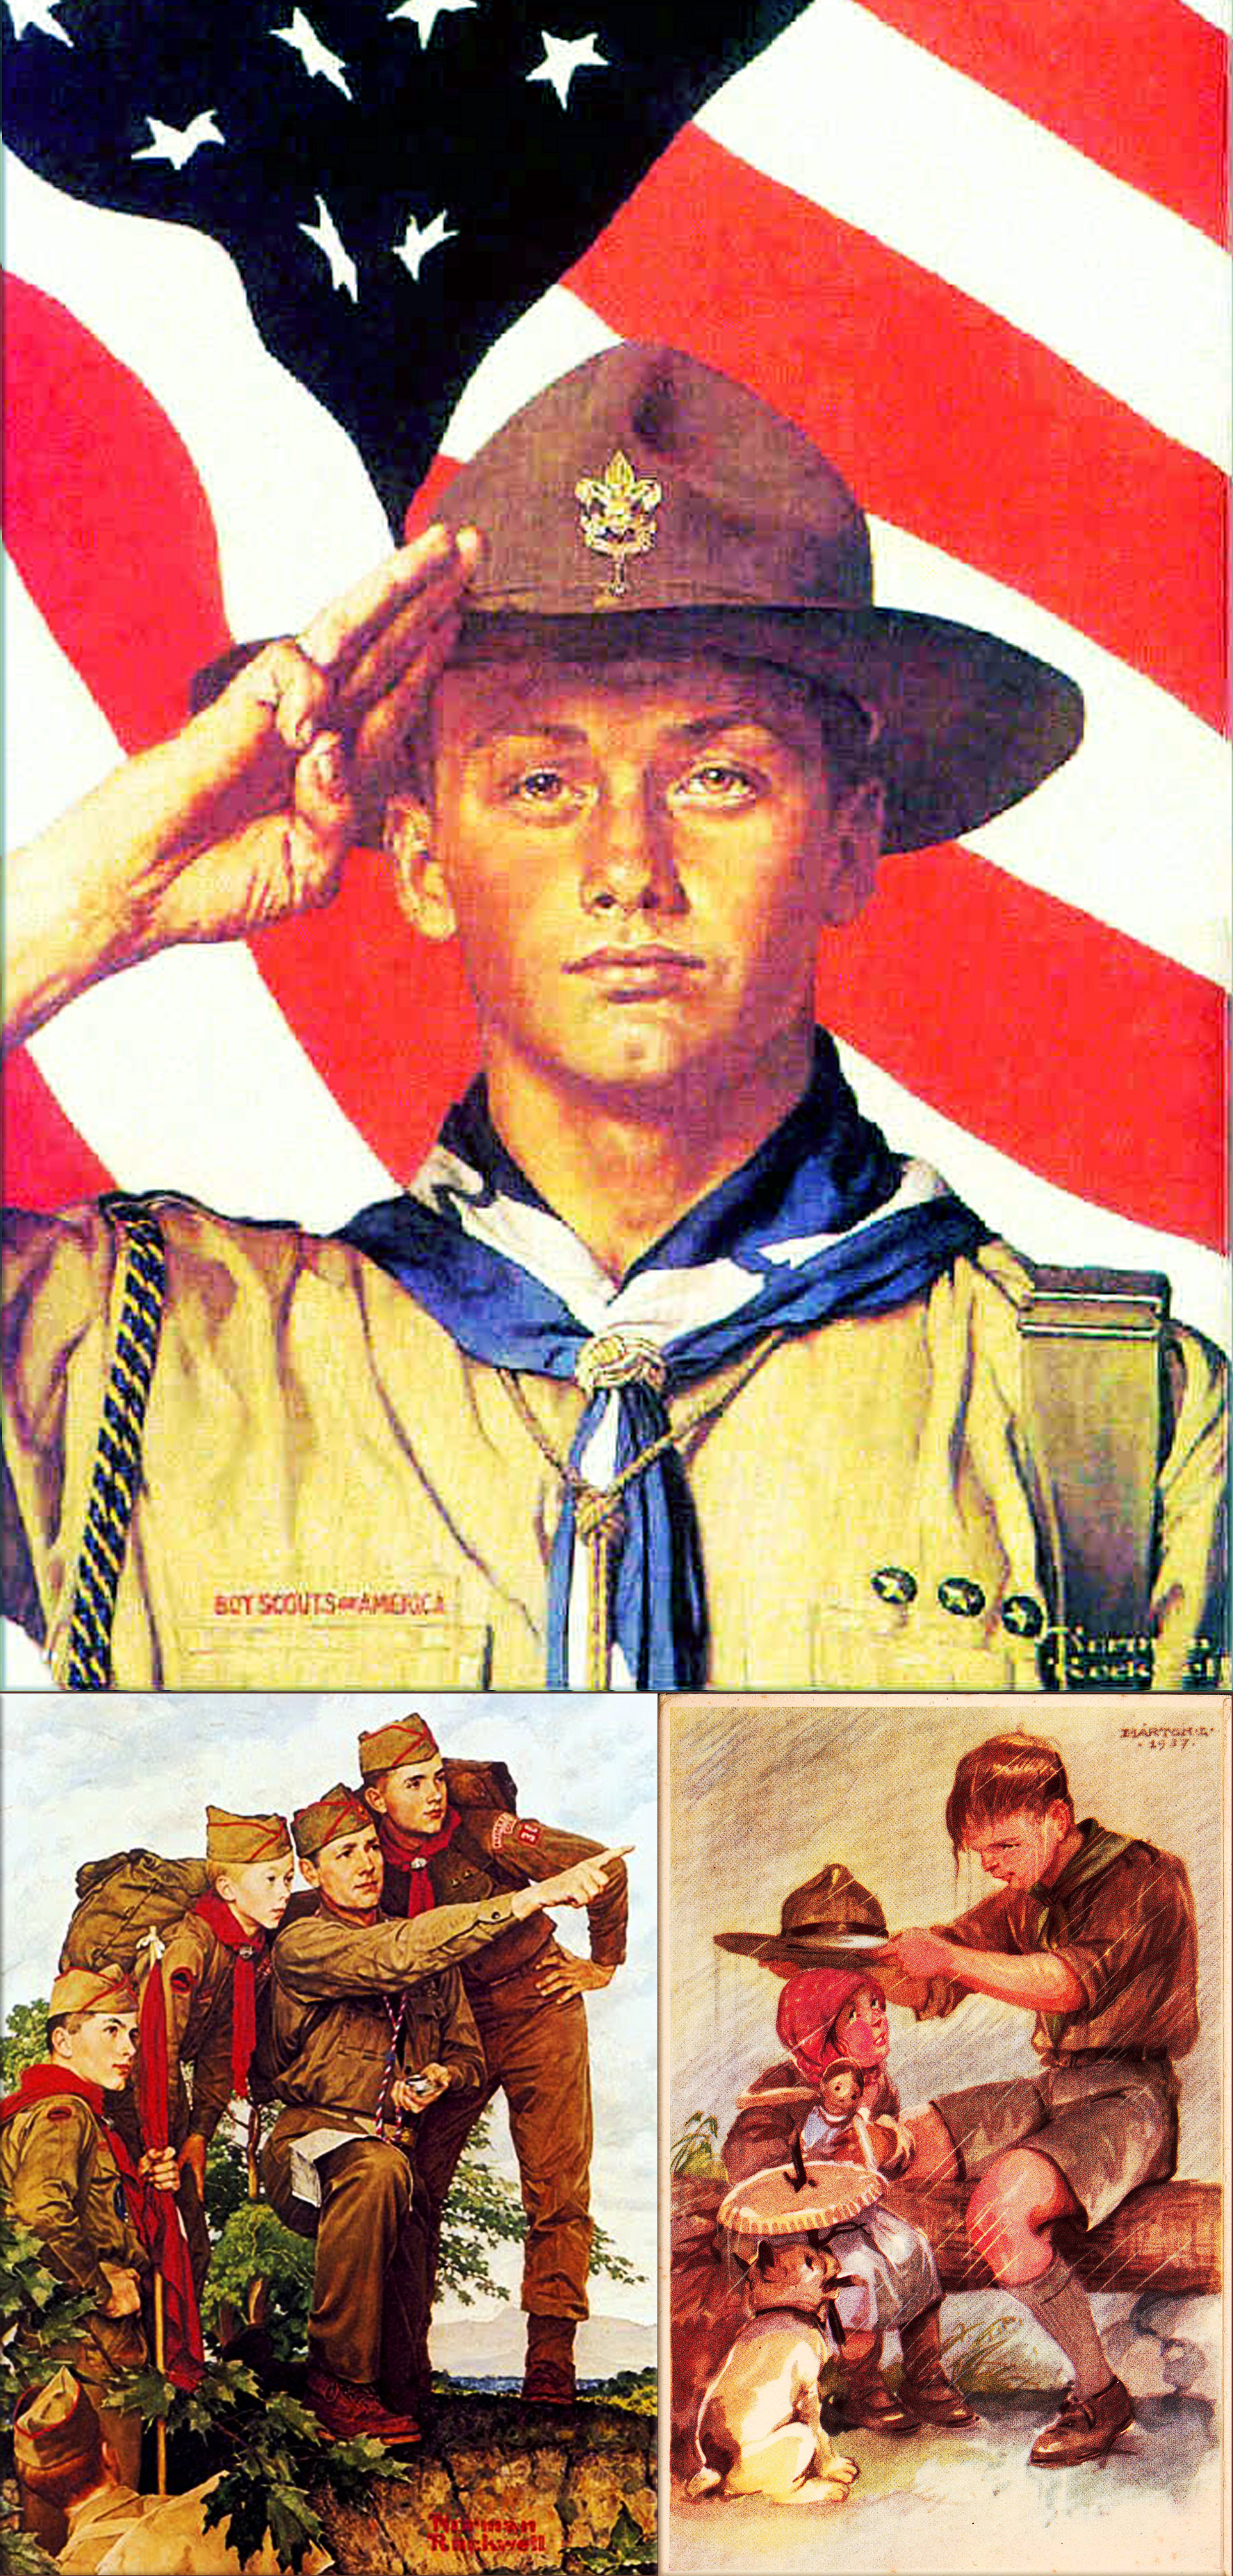 Boy Scouts of America, by Norman Rockwell, 1944